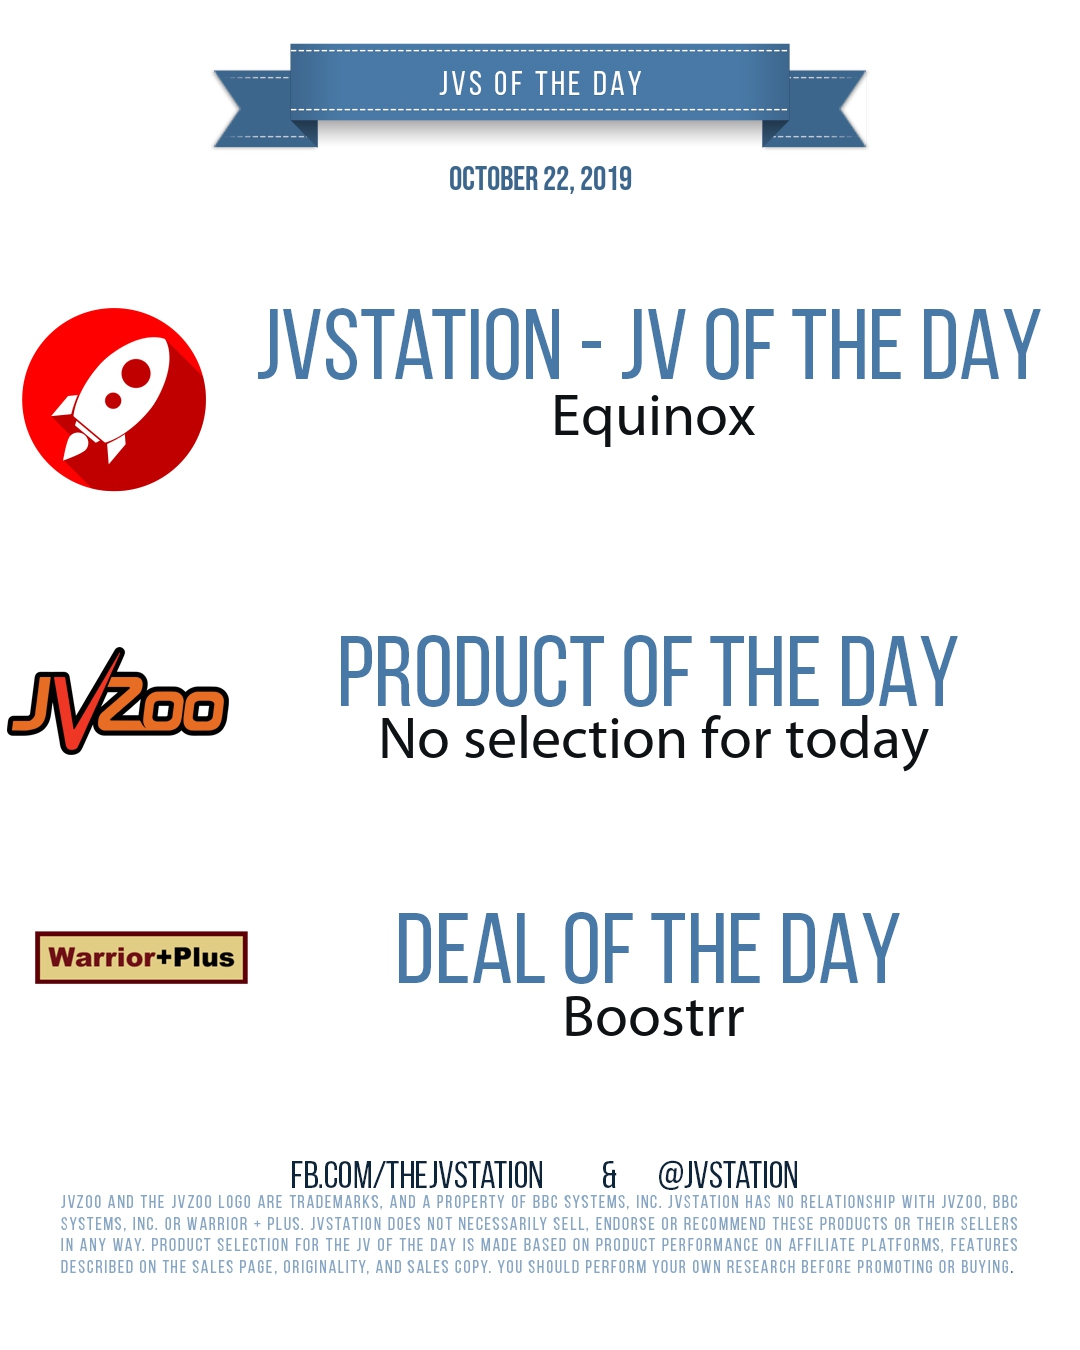 JVs of the day - October 22, 2019